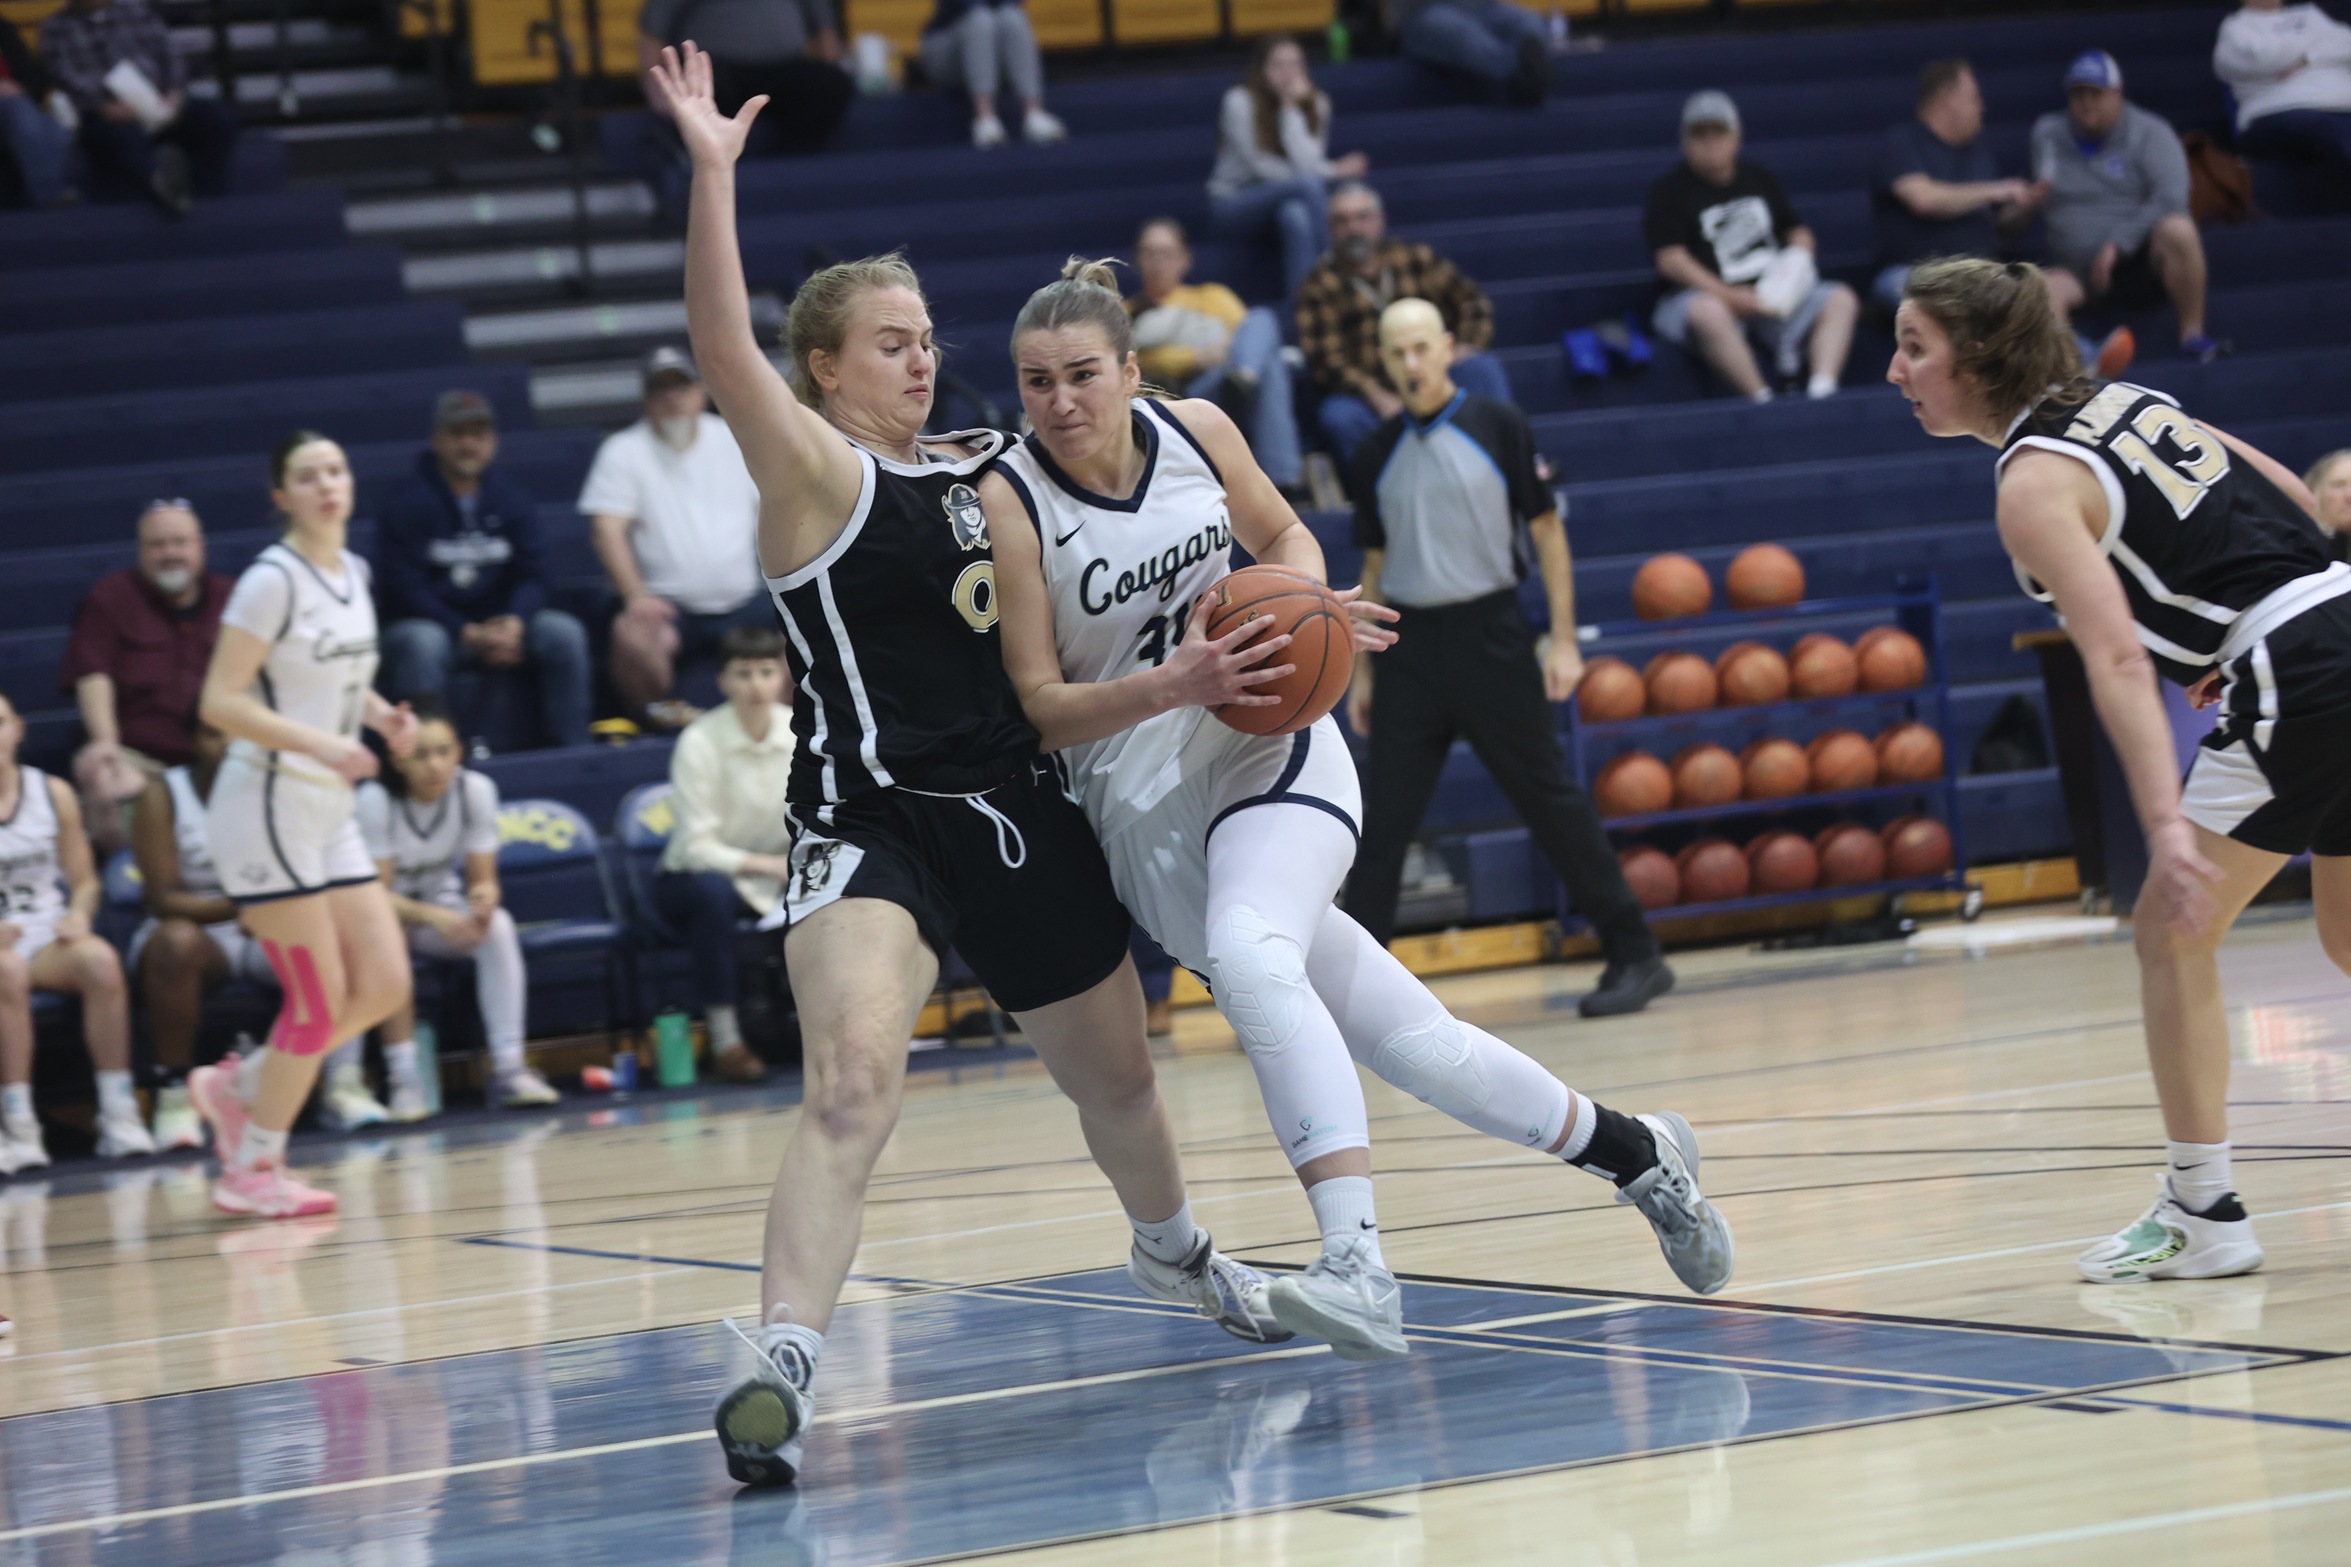 Adelina Urtane drives to the basketball against NJC on Monday.